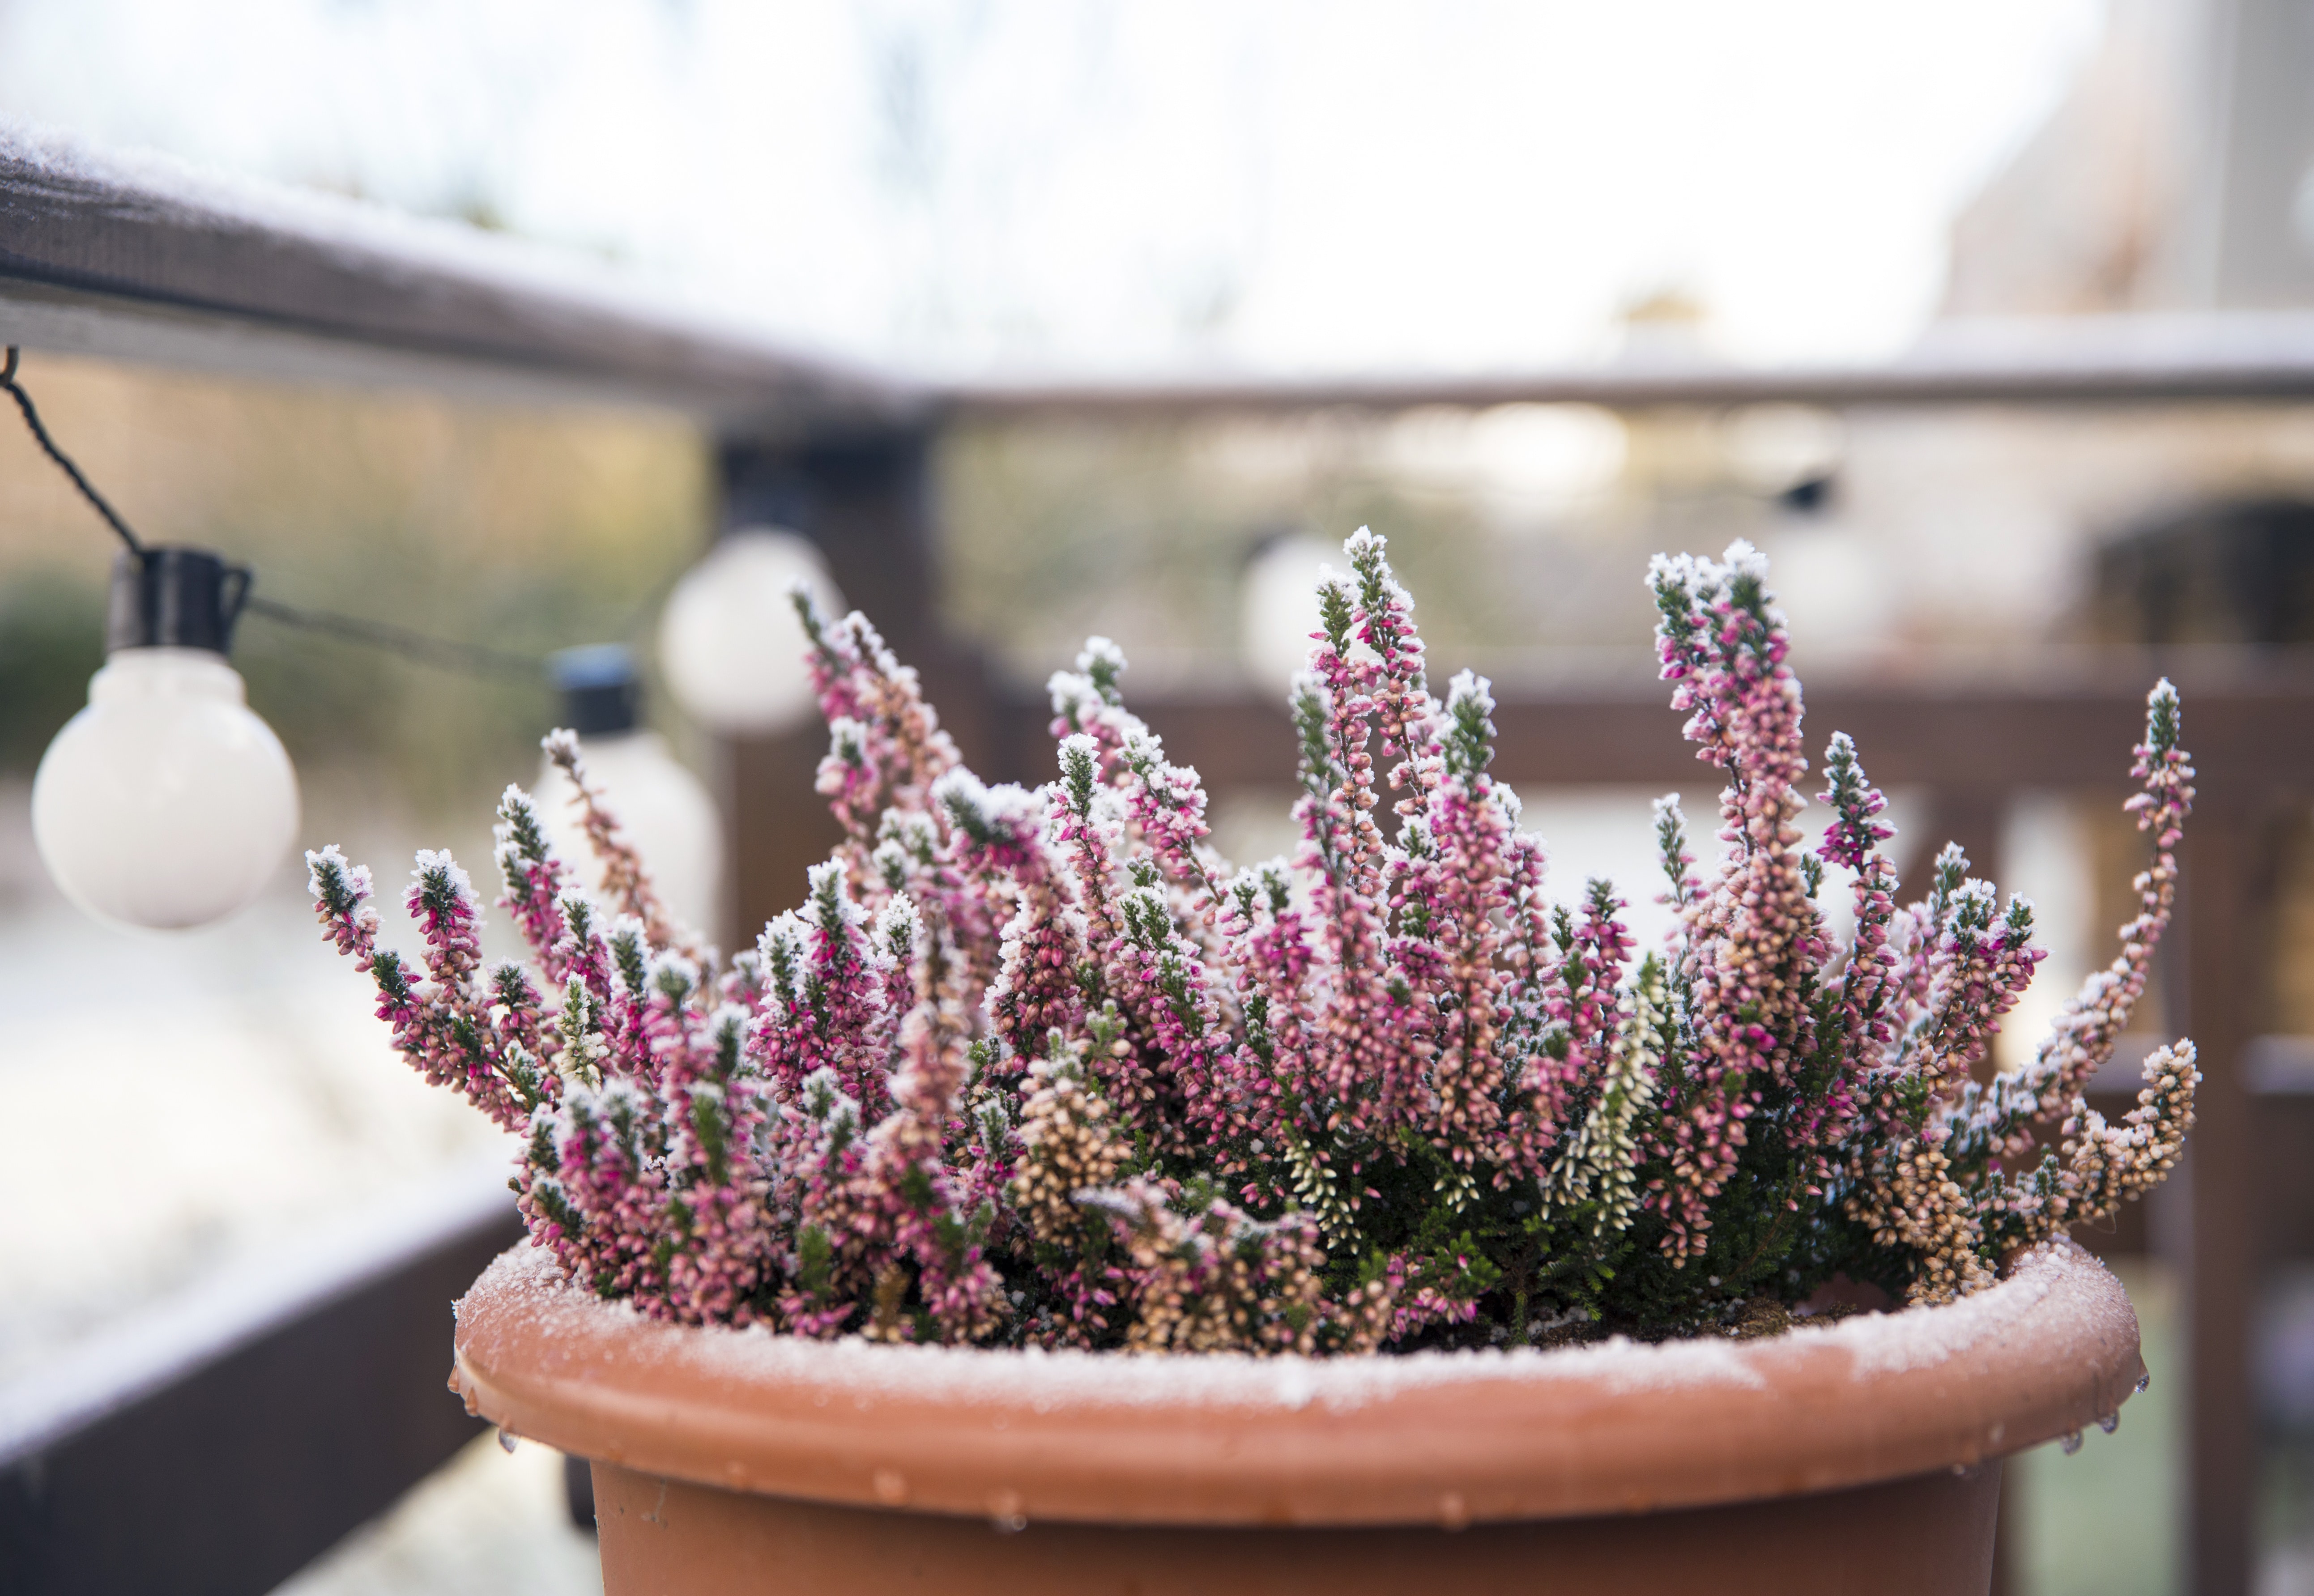 Pink heather flower growing in terracotta color garden pot, outdoors on terrace in winter, covered with white frost.